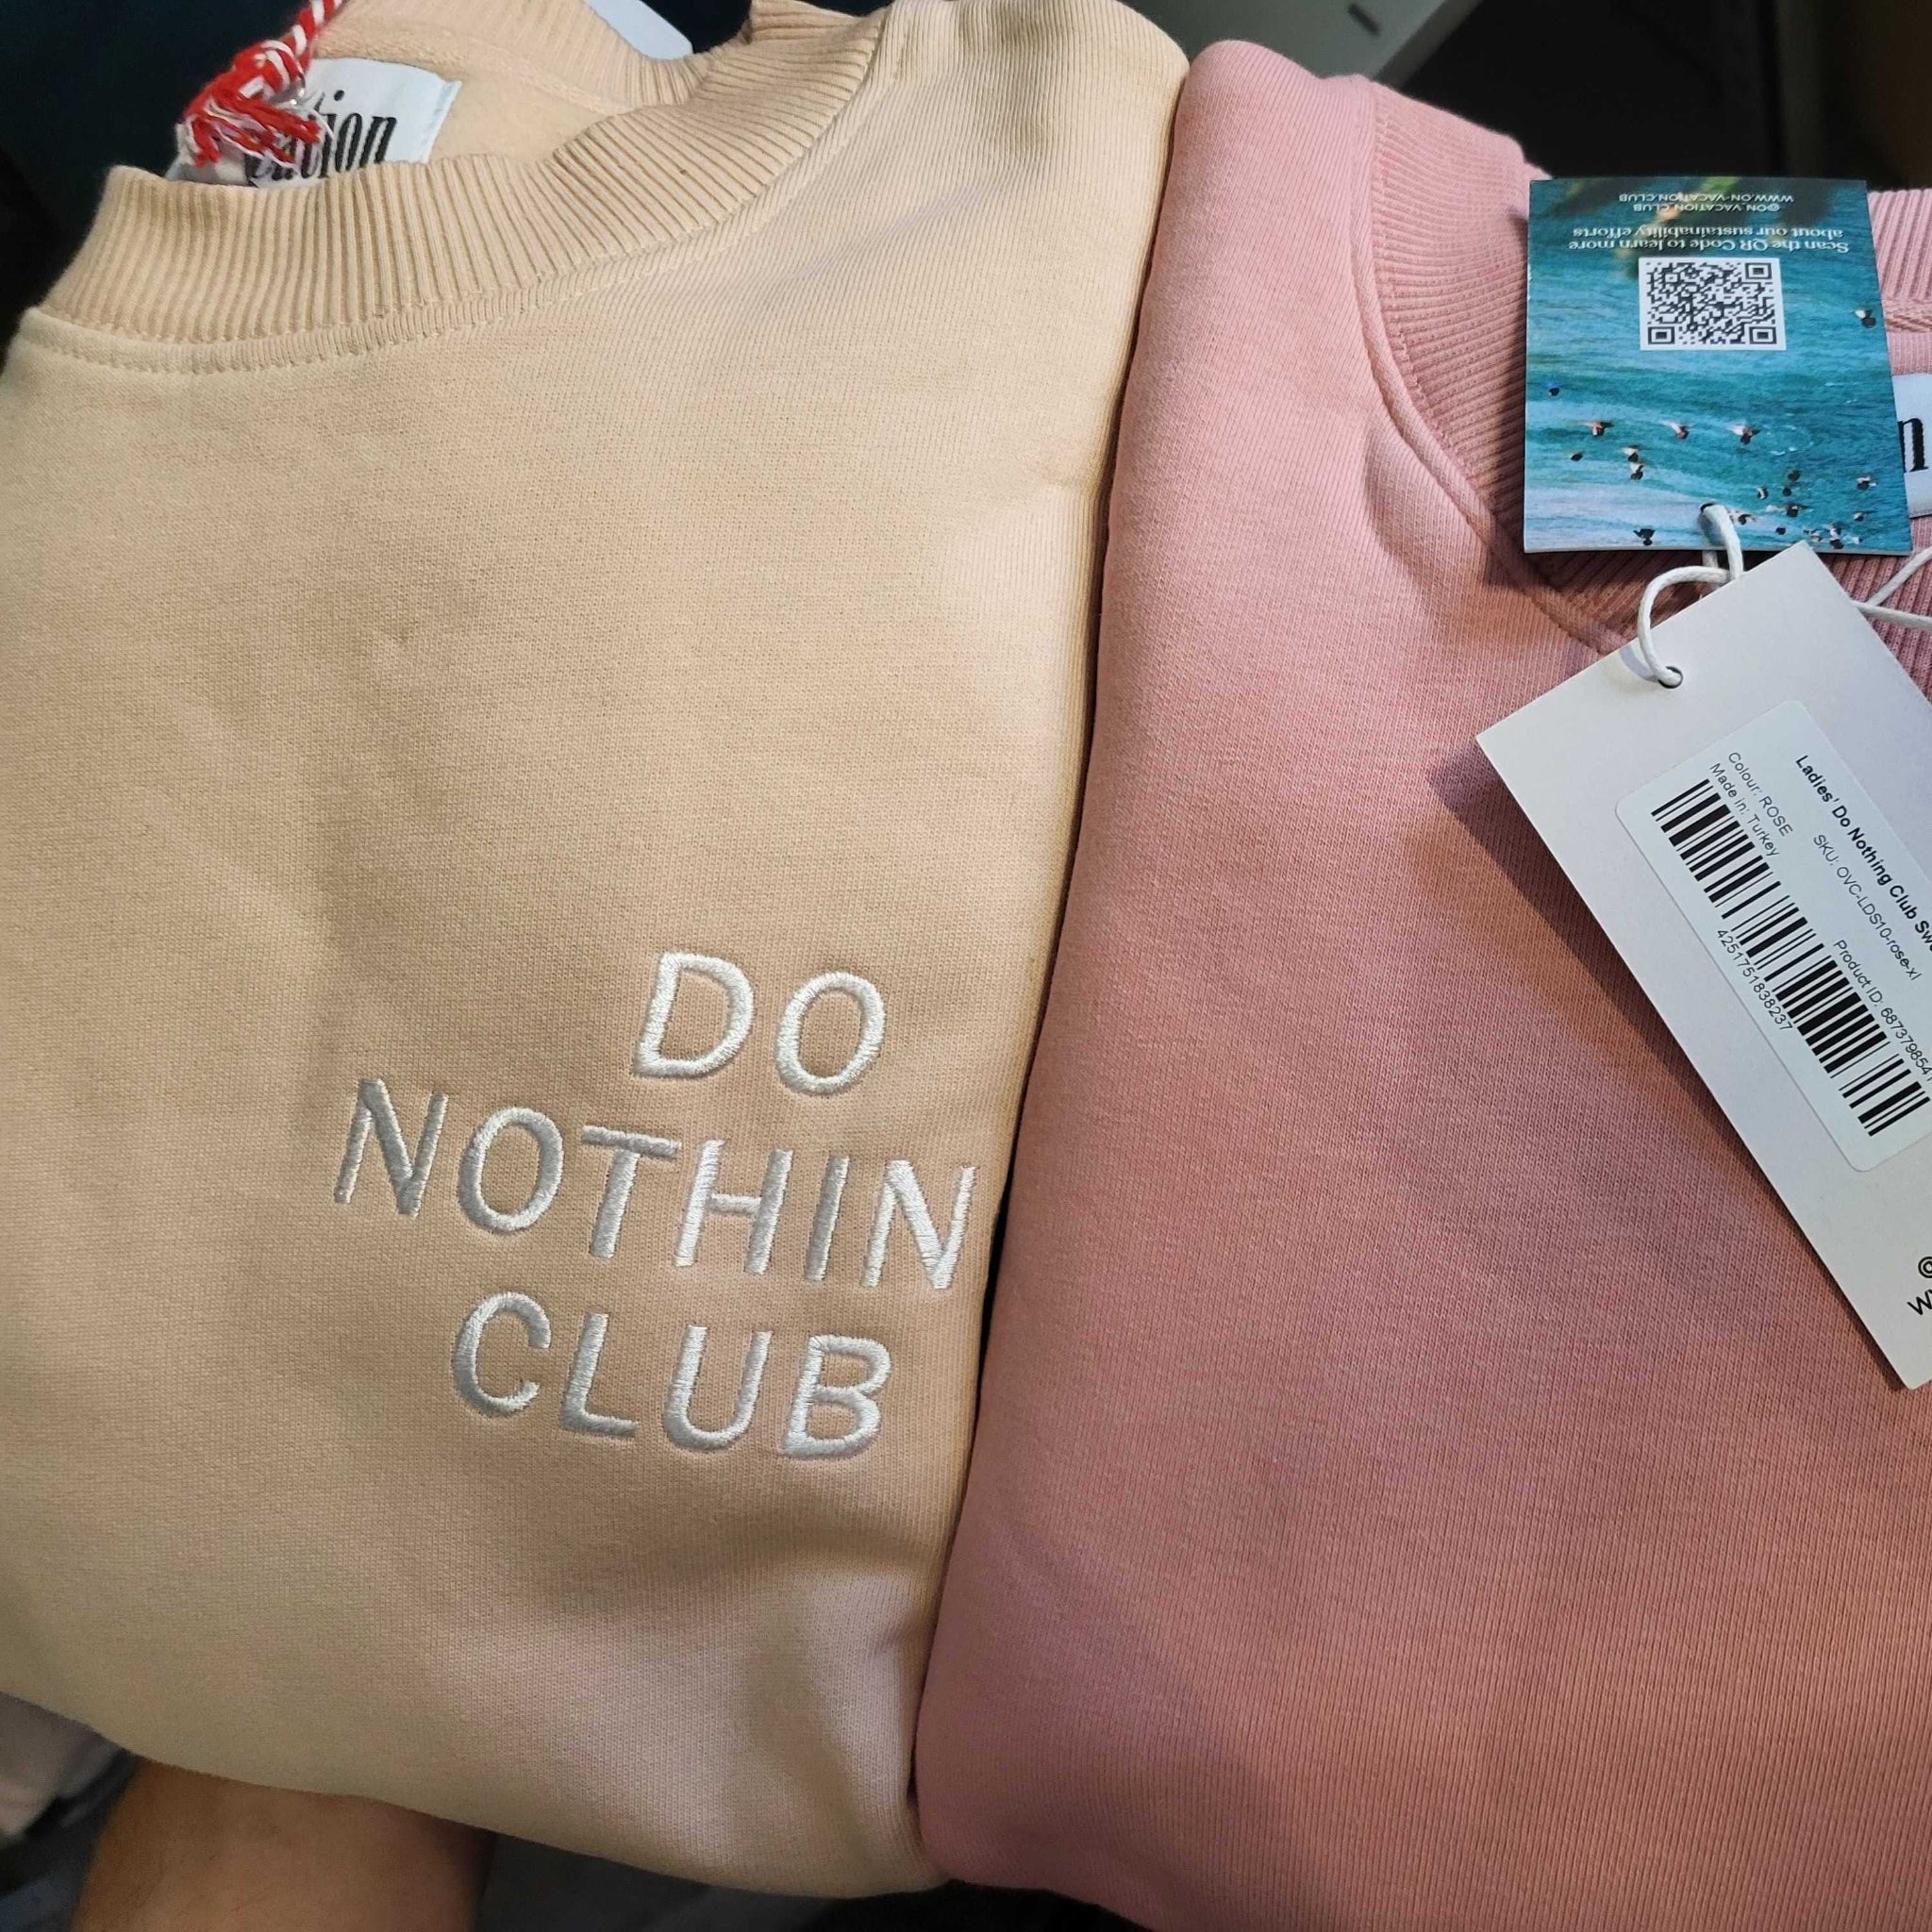 On Vacation Ladies Sweater "Do Nothing Club" - Rose